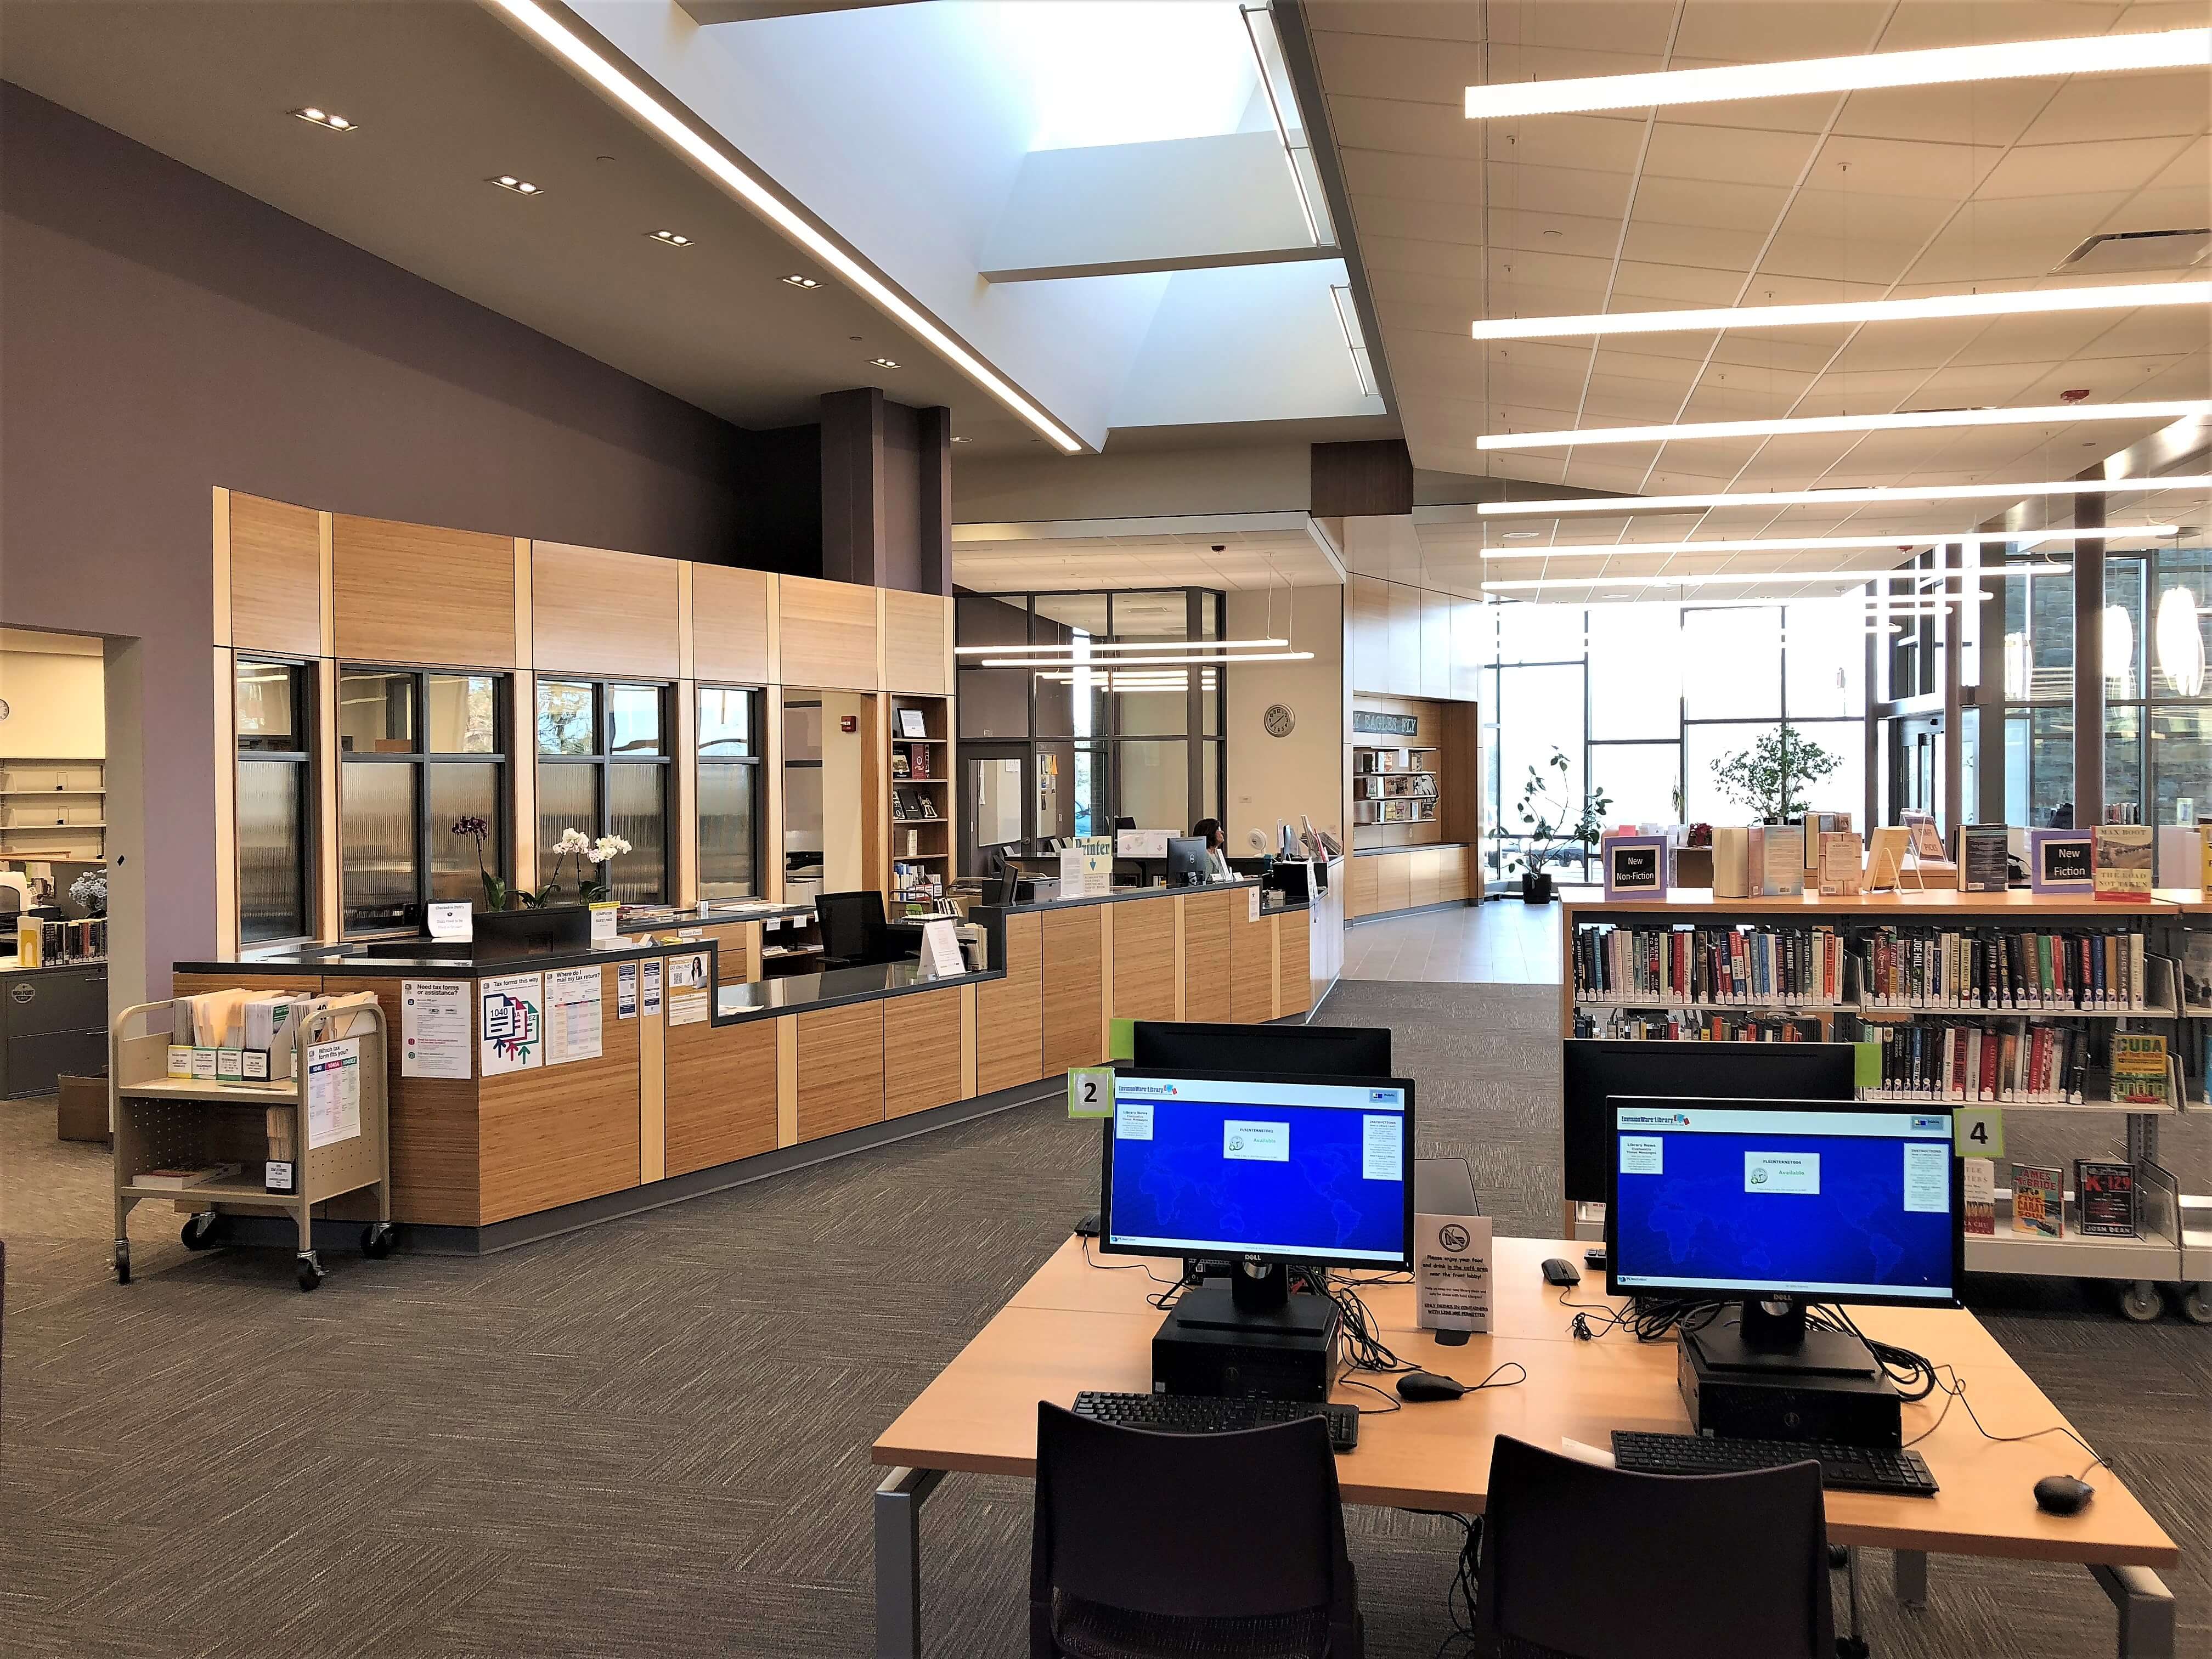 Building libraries for the digital age